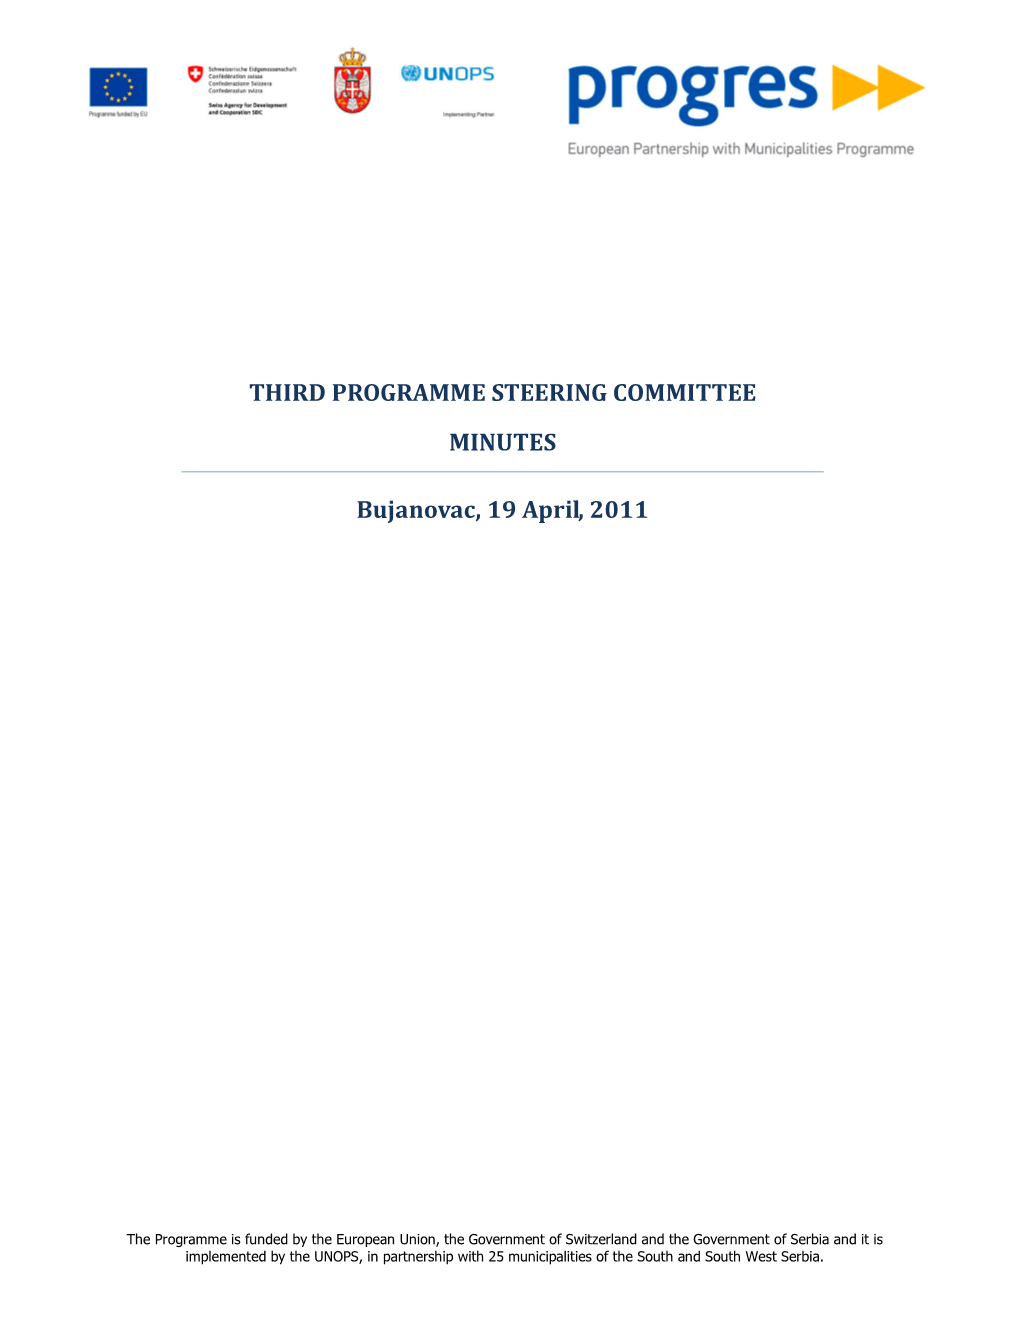 Minutes from the Third PROGRES Steering Committee Meeting, 19 April 2011, Bujanovac